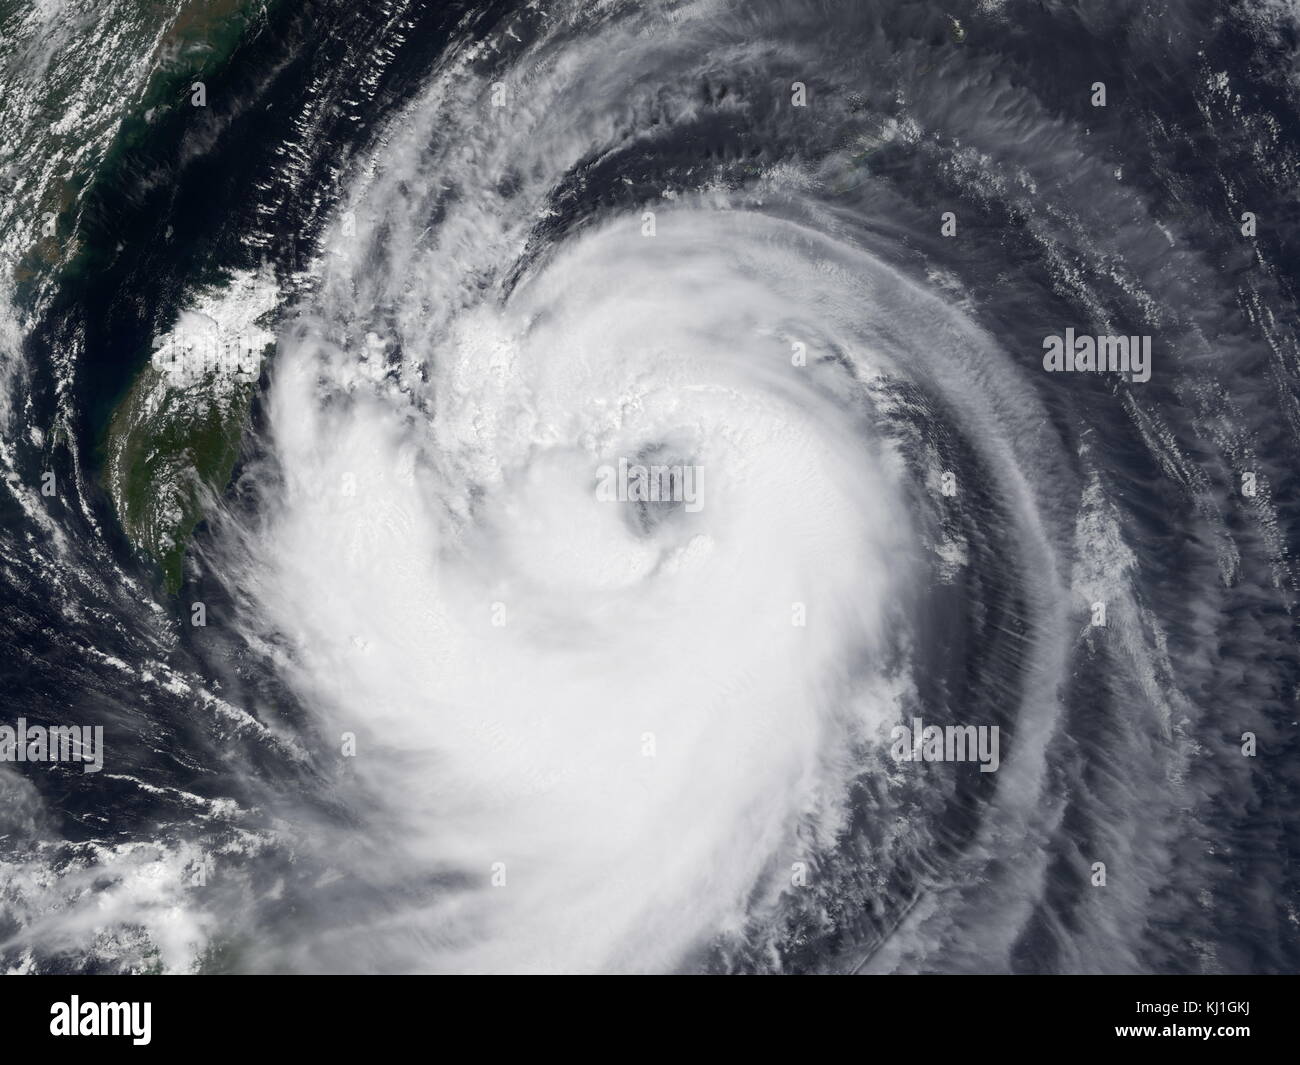 Typhoon Chaba was the strongest tropical cyclone in the western Pacific during 2004 and caused a swath of damage from the Mariana Islands to Japan from August through September of that year. Chaba was the Japan's second costliest storm during the season, only behind Songda in September, and peaked as a typhoon with maximum sustained winds equivalent to that of a Category 5 on the Saffir–Simpson hurricane wind scale. Stock Photo